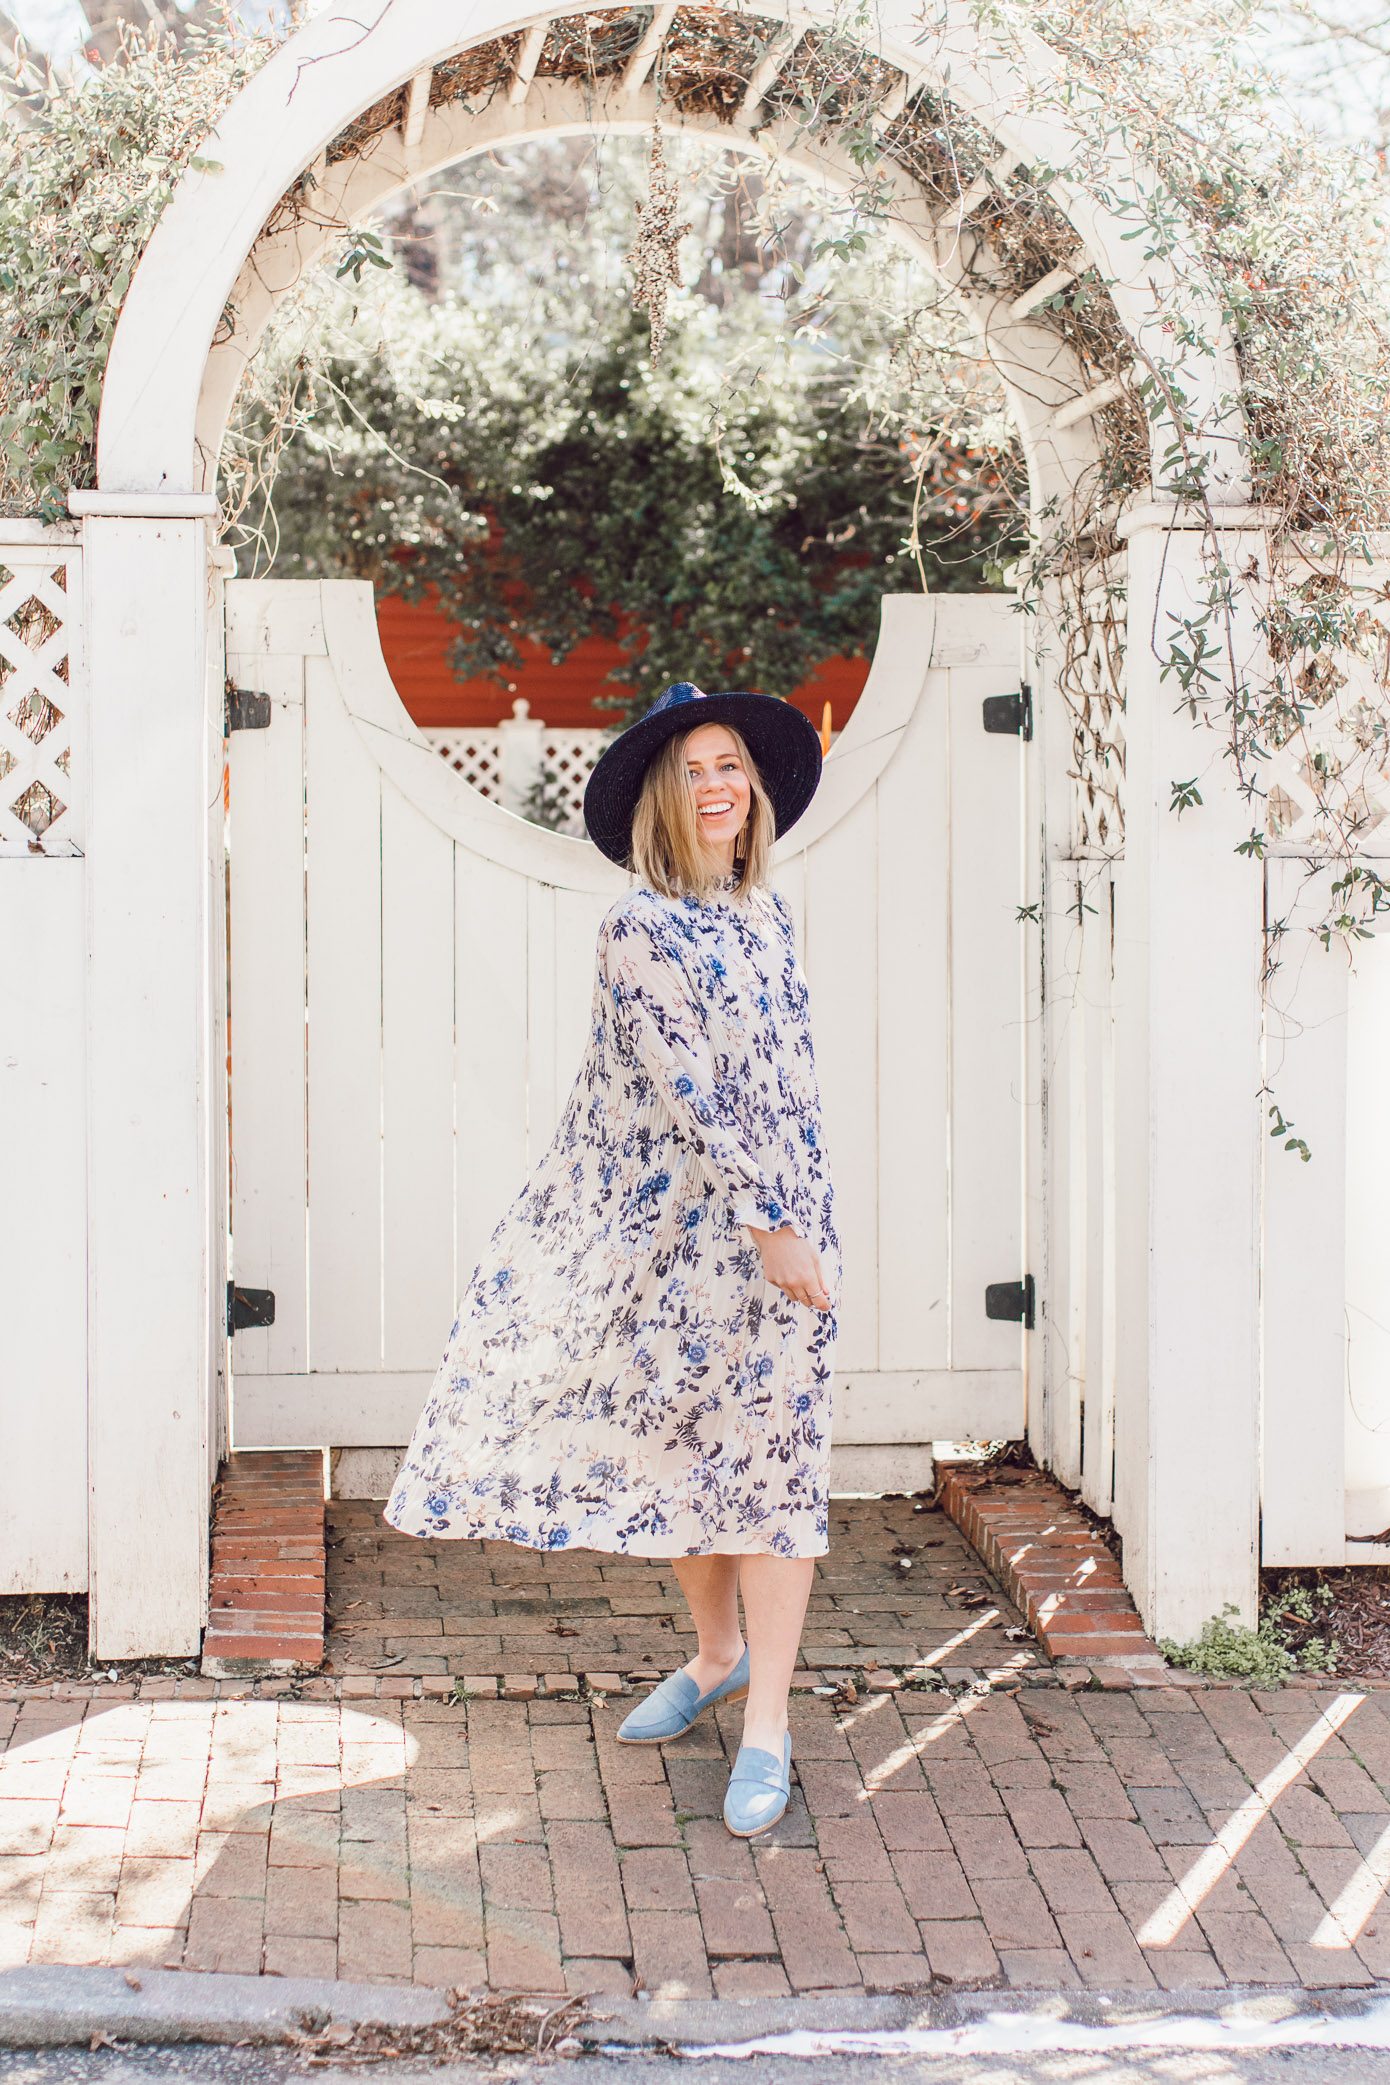 Spring Bridal Shower Dresses for the Bride and Guests | Blue Floral Midi Dress, Blue Suede Loafers, Navy Straw Hat styled on Louella Reese